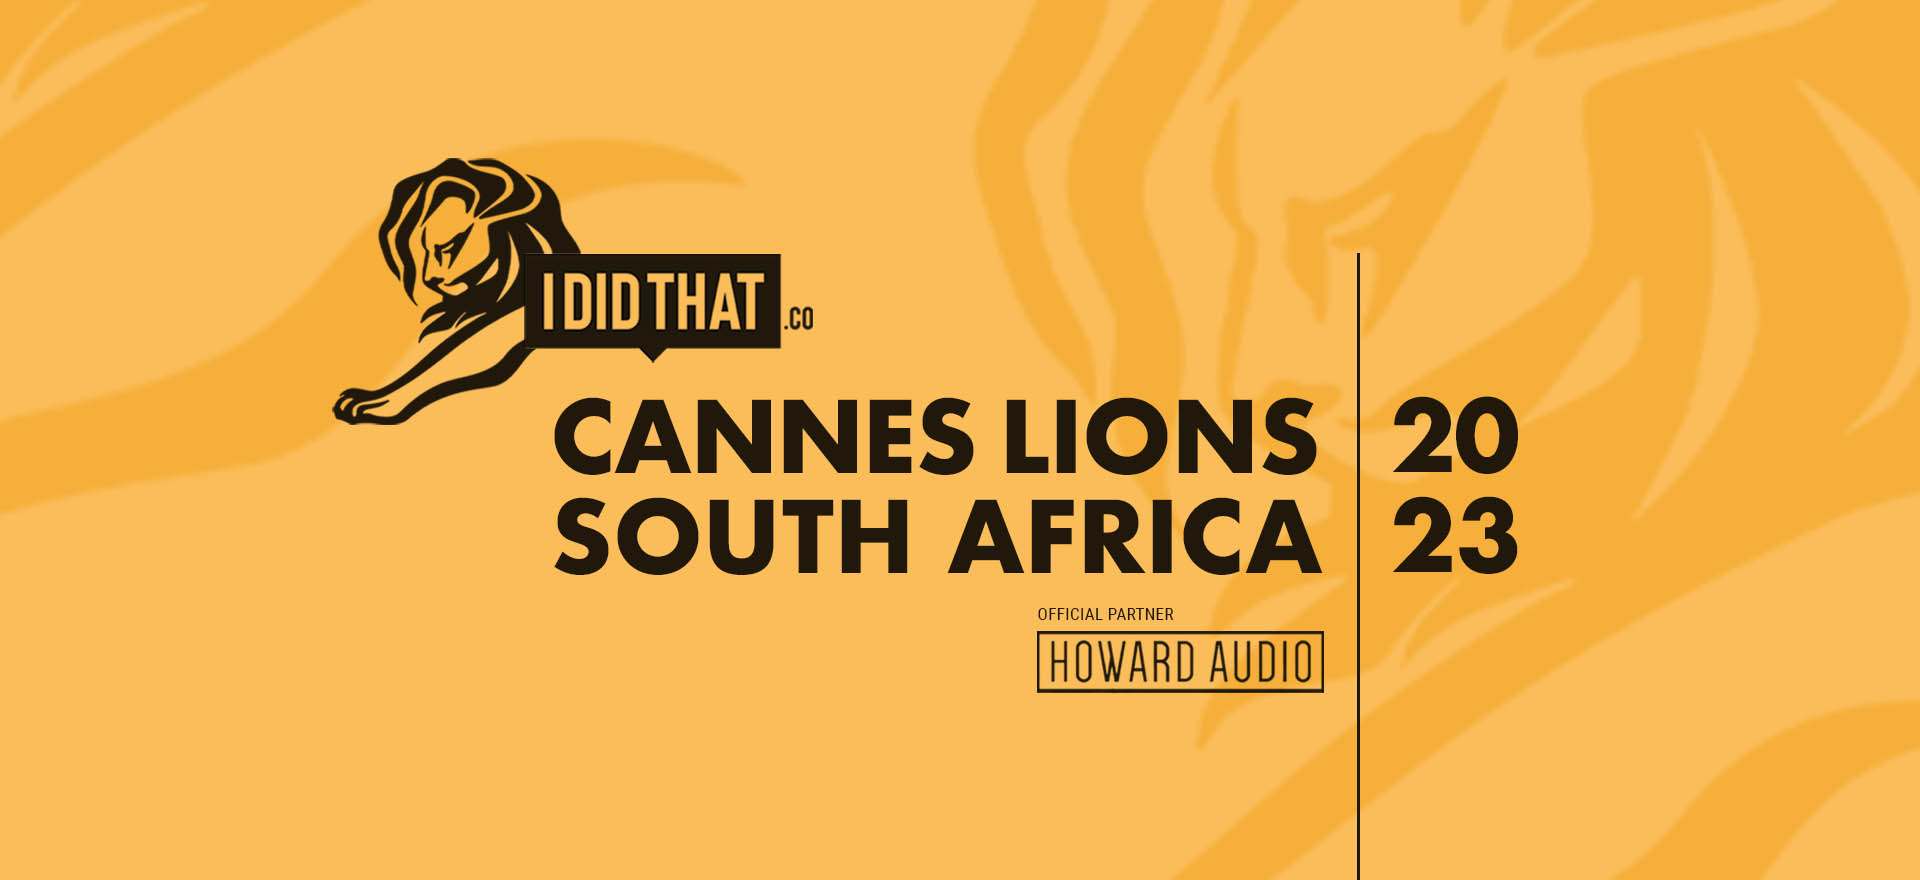 IDIDTHAT partners with Howard Audio to bring South Africa all the Cannes Lions news 2023